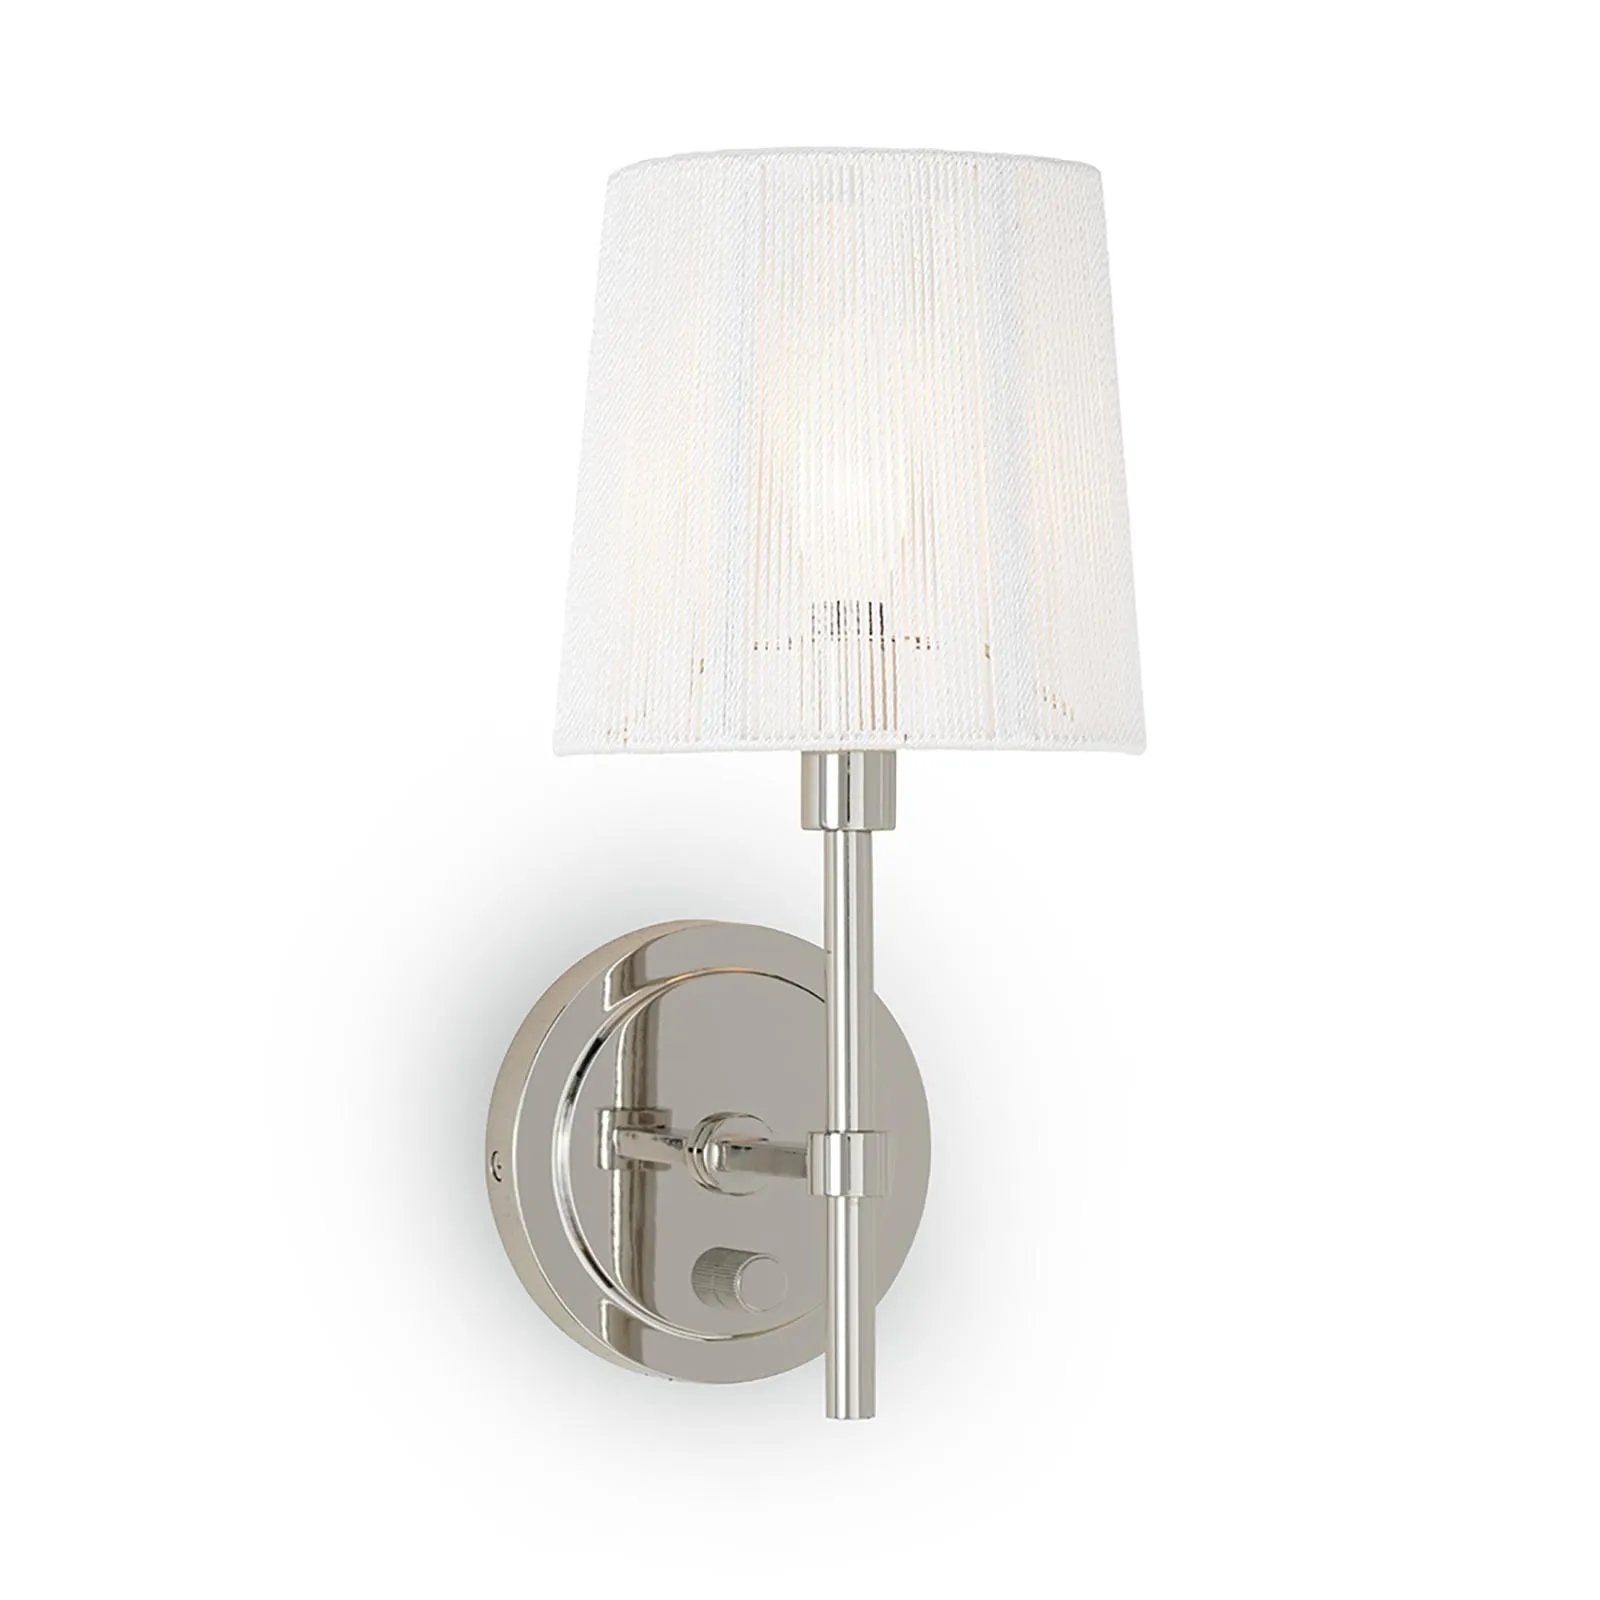 The Franklin Sconce is a harmonious blend of classic and femininity with the added utility of a dimmer knob on its backplate. Adding a touch of tactile intrigue through its unique string lamp shade, the Franklin Sconce is the perfect addition to a powder room or as a pair on either side of a bed. Amethyst Home provides interior design, new home construction design consulting, vintage area rugs, and lighting in the Monterey metro area.